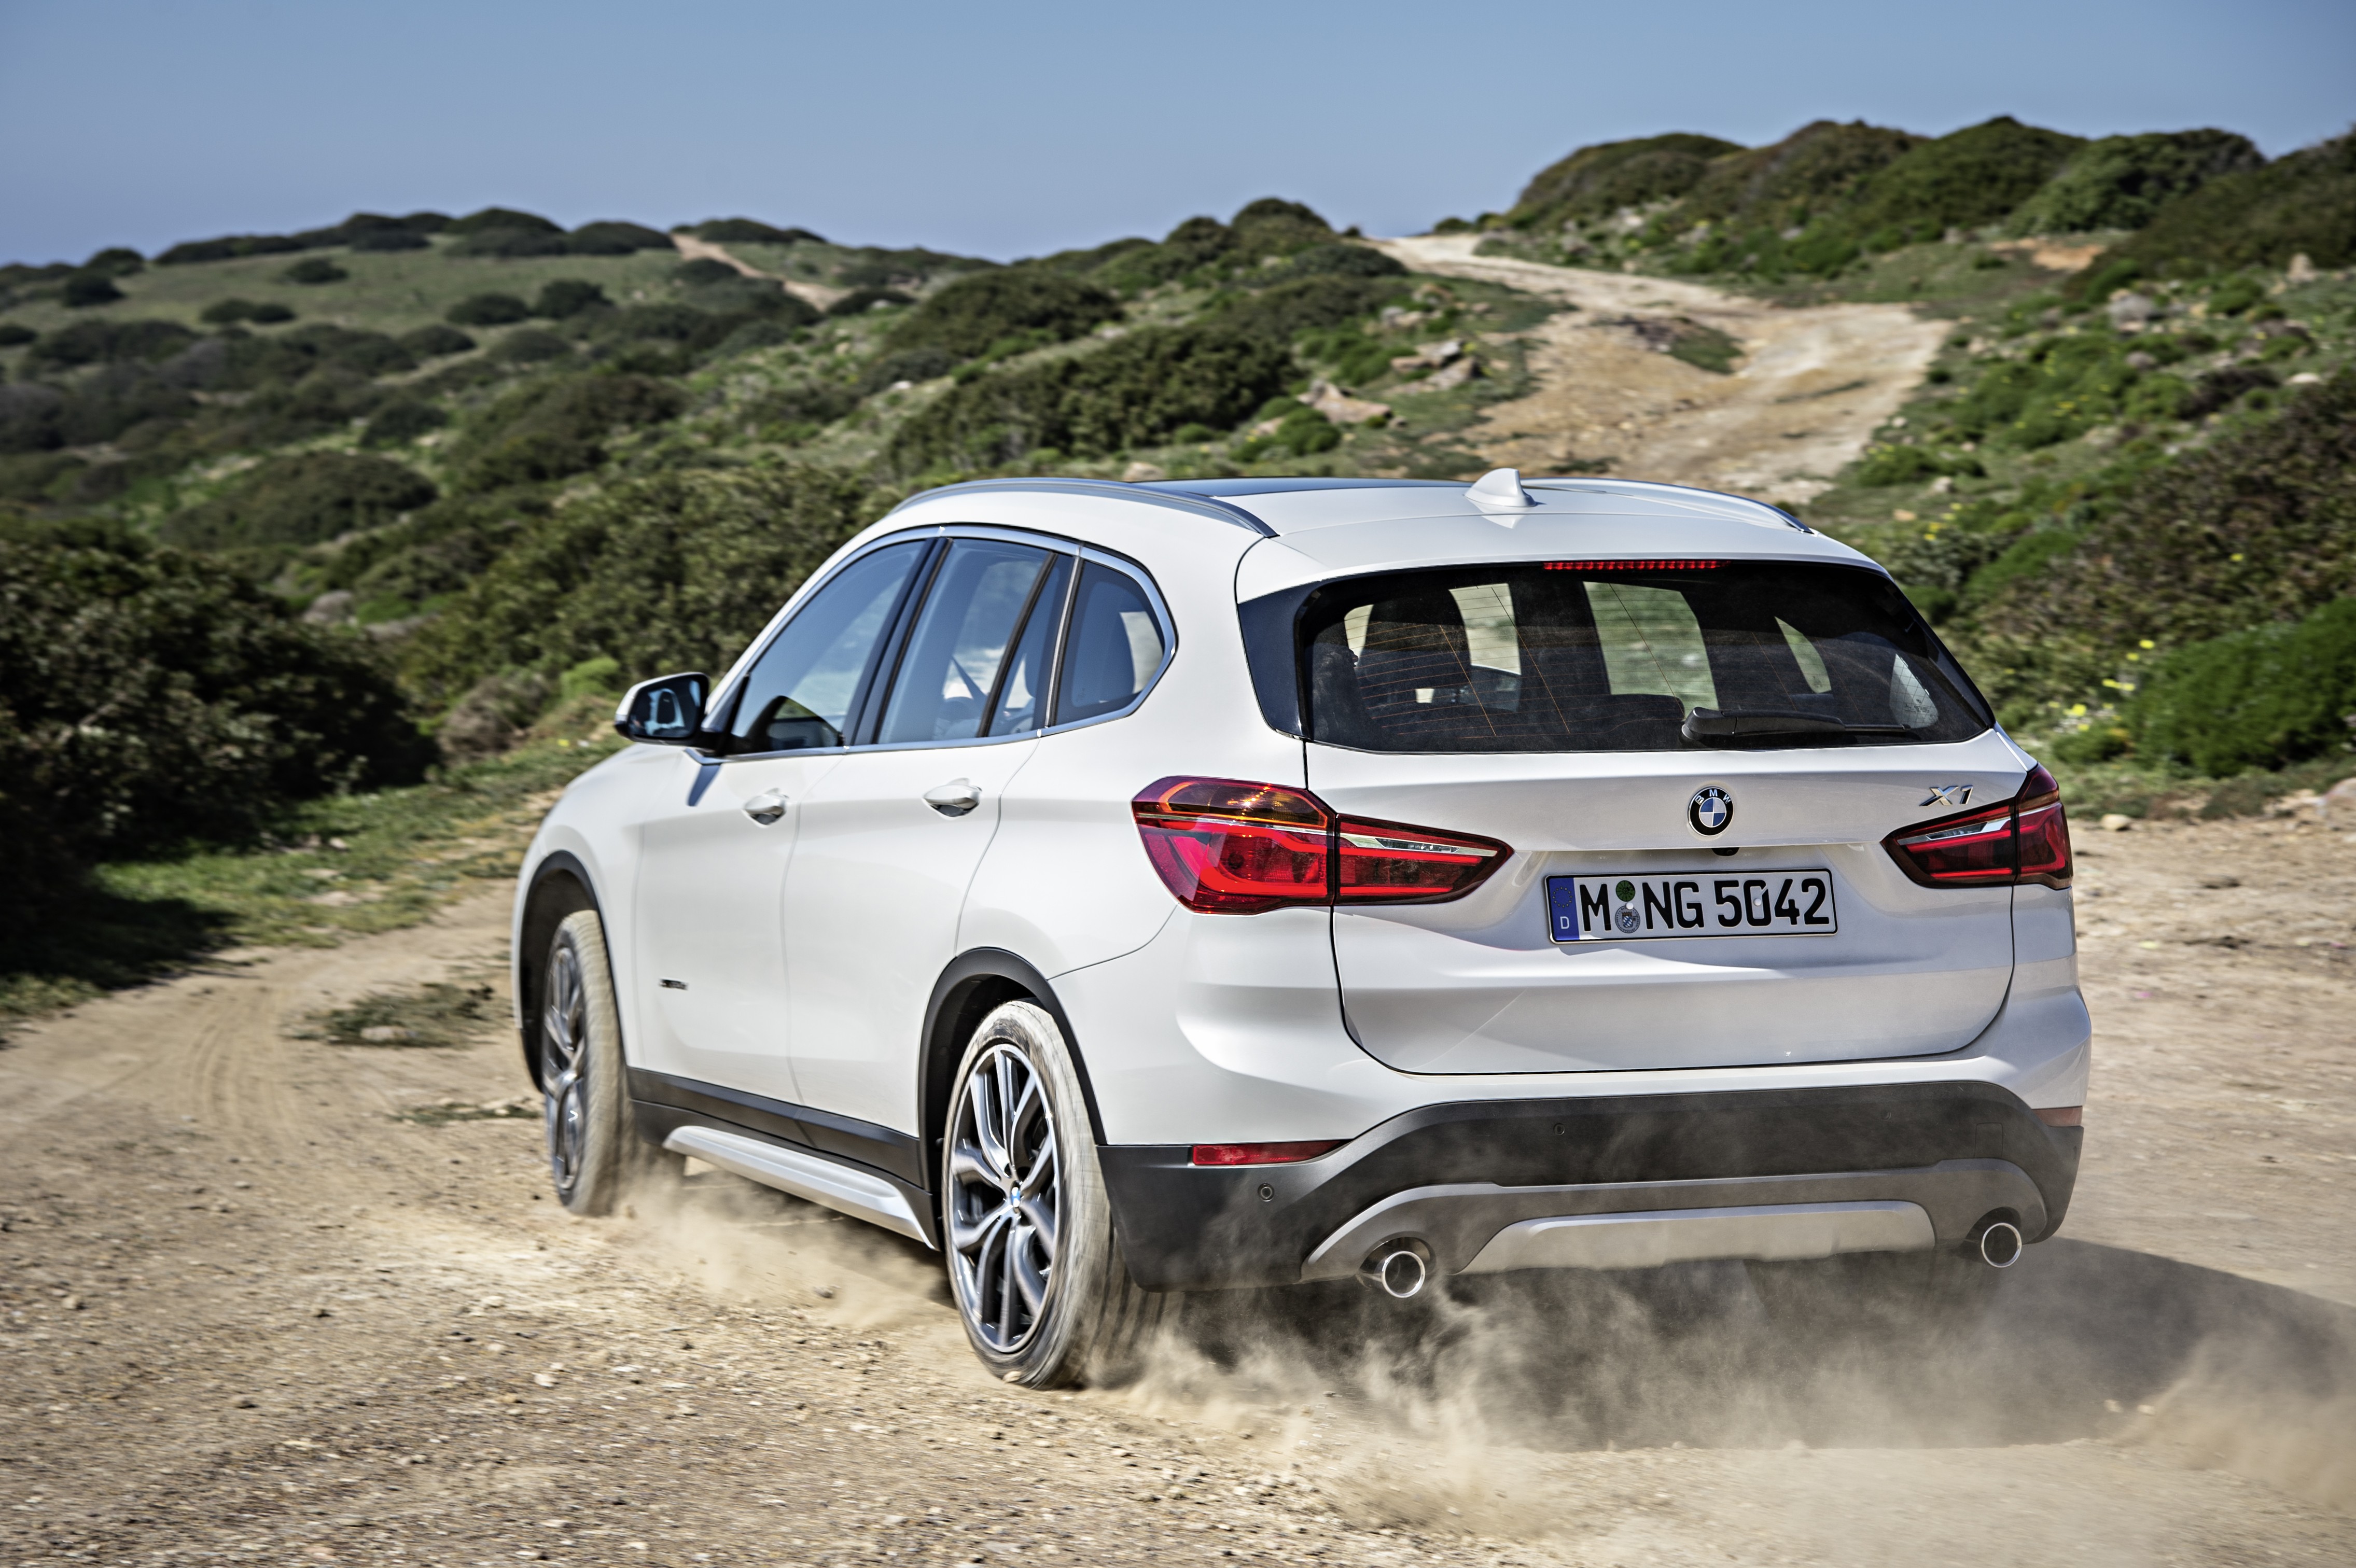 2016 BMW X1 World Premiere: The New Crossover Is Finally Here